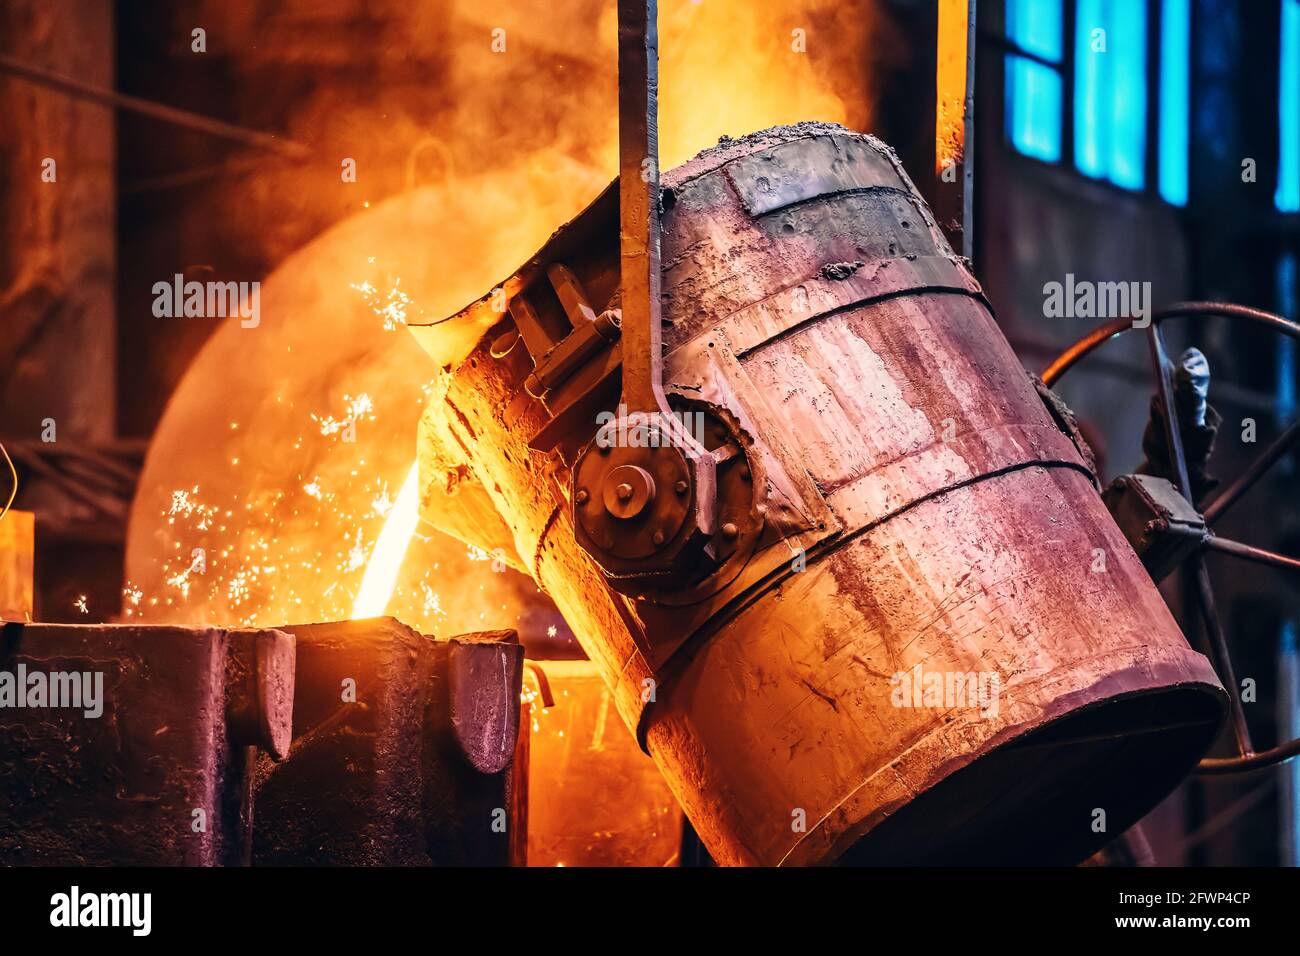 Molten metal pour from ladle Into sand mold. Iron casting process in metallurgy foundry plant, heavy industry. Stock Photo